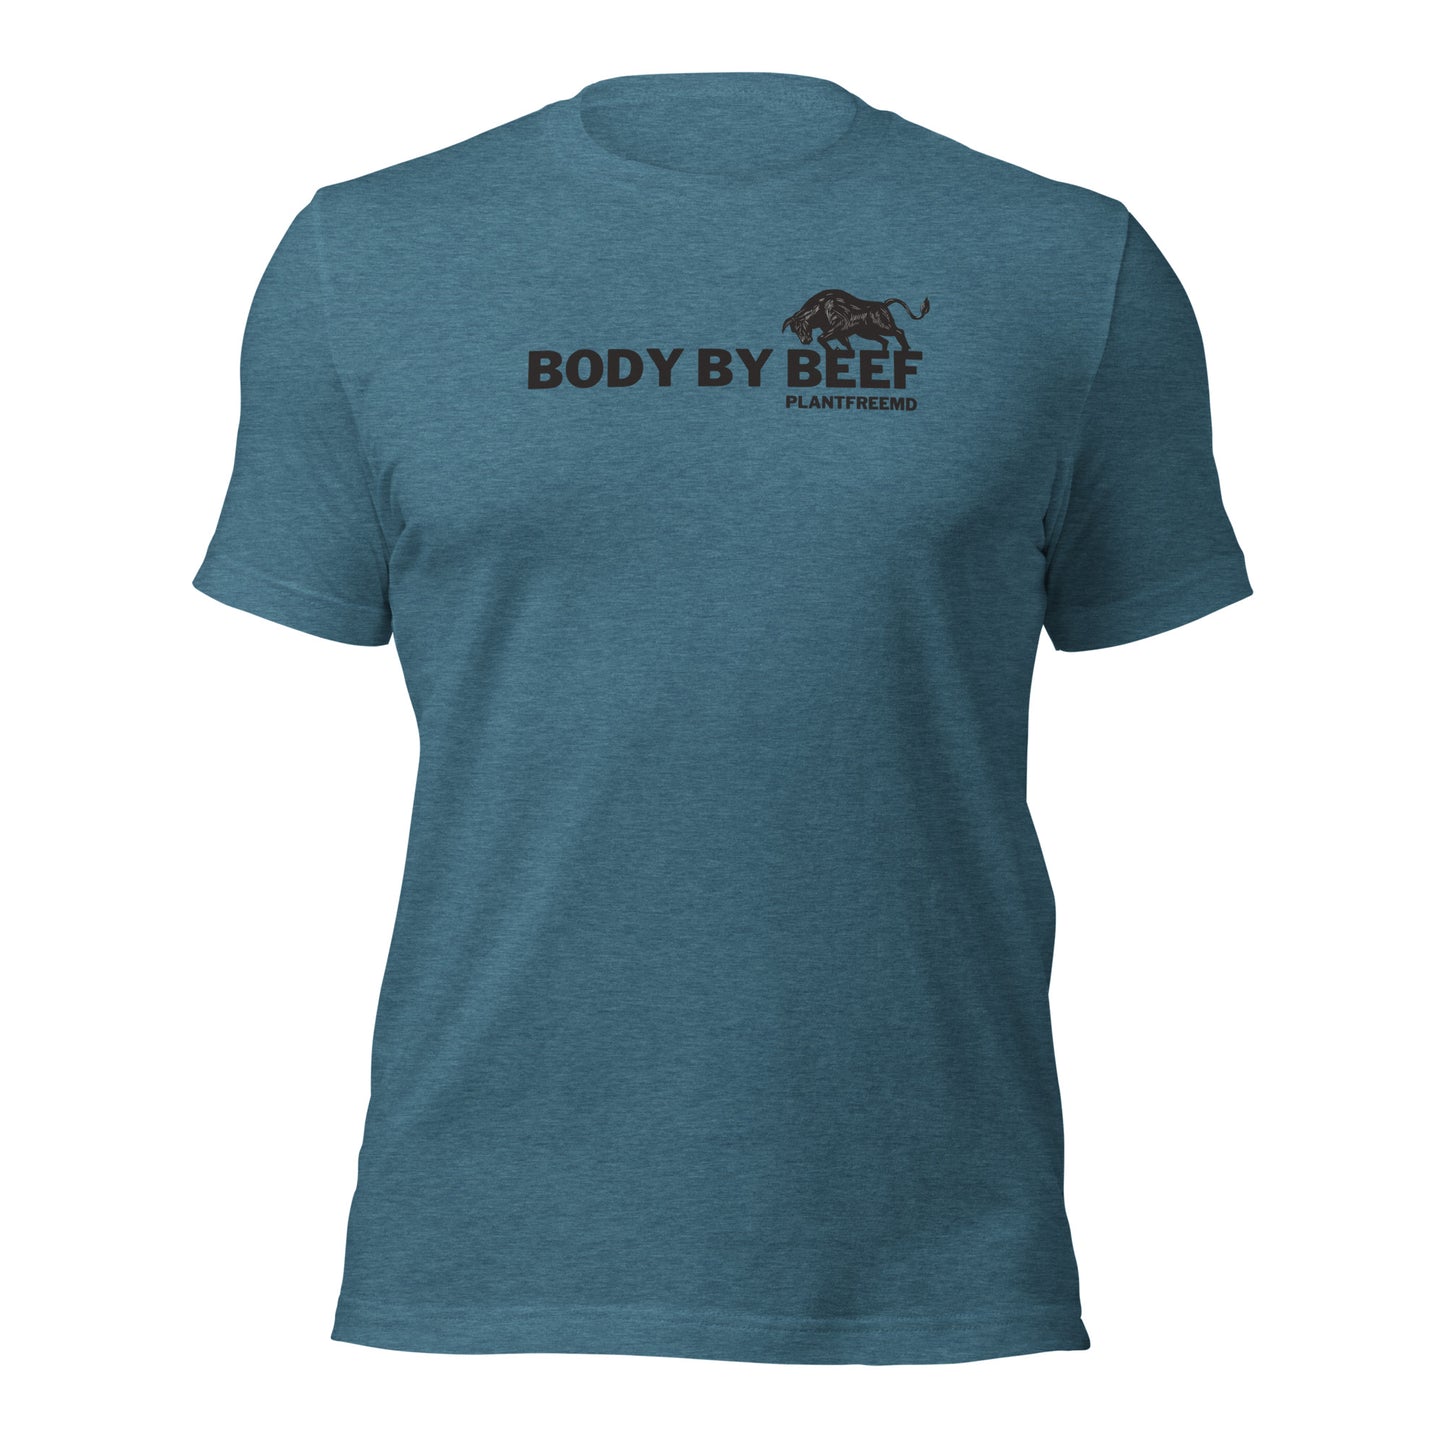 Body By Beef 2 Unisex T-shirt